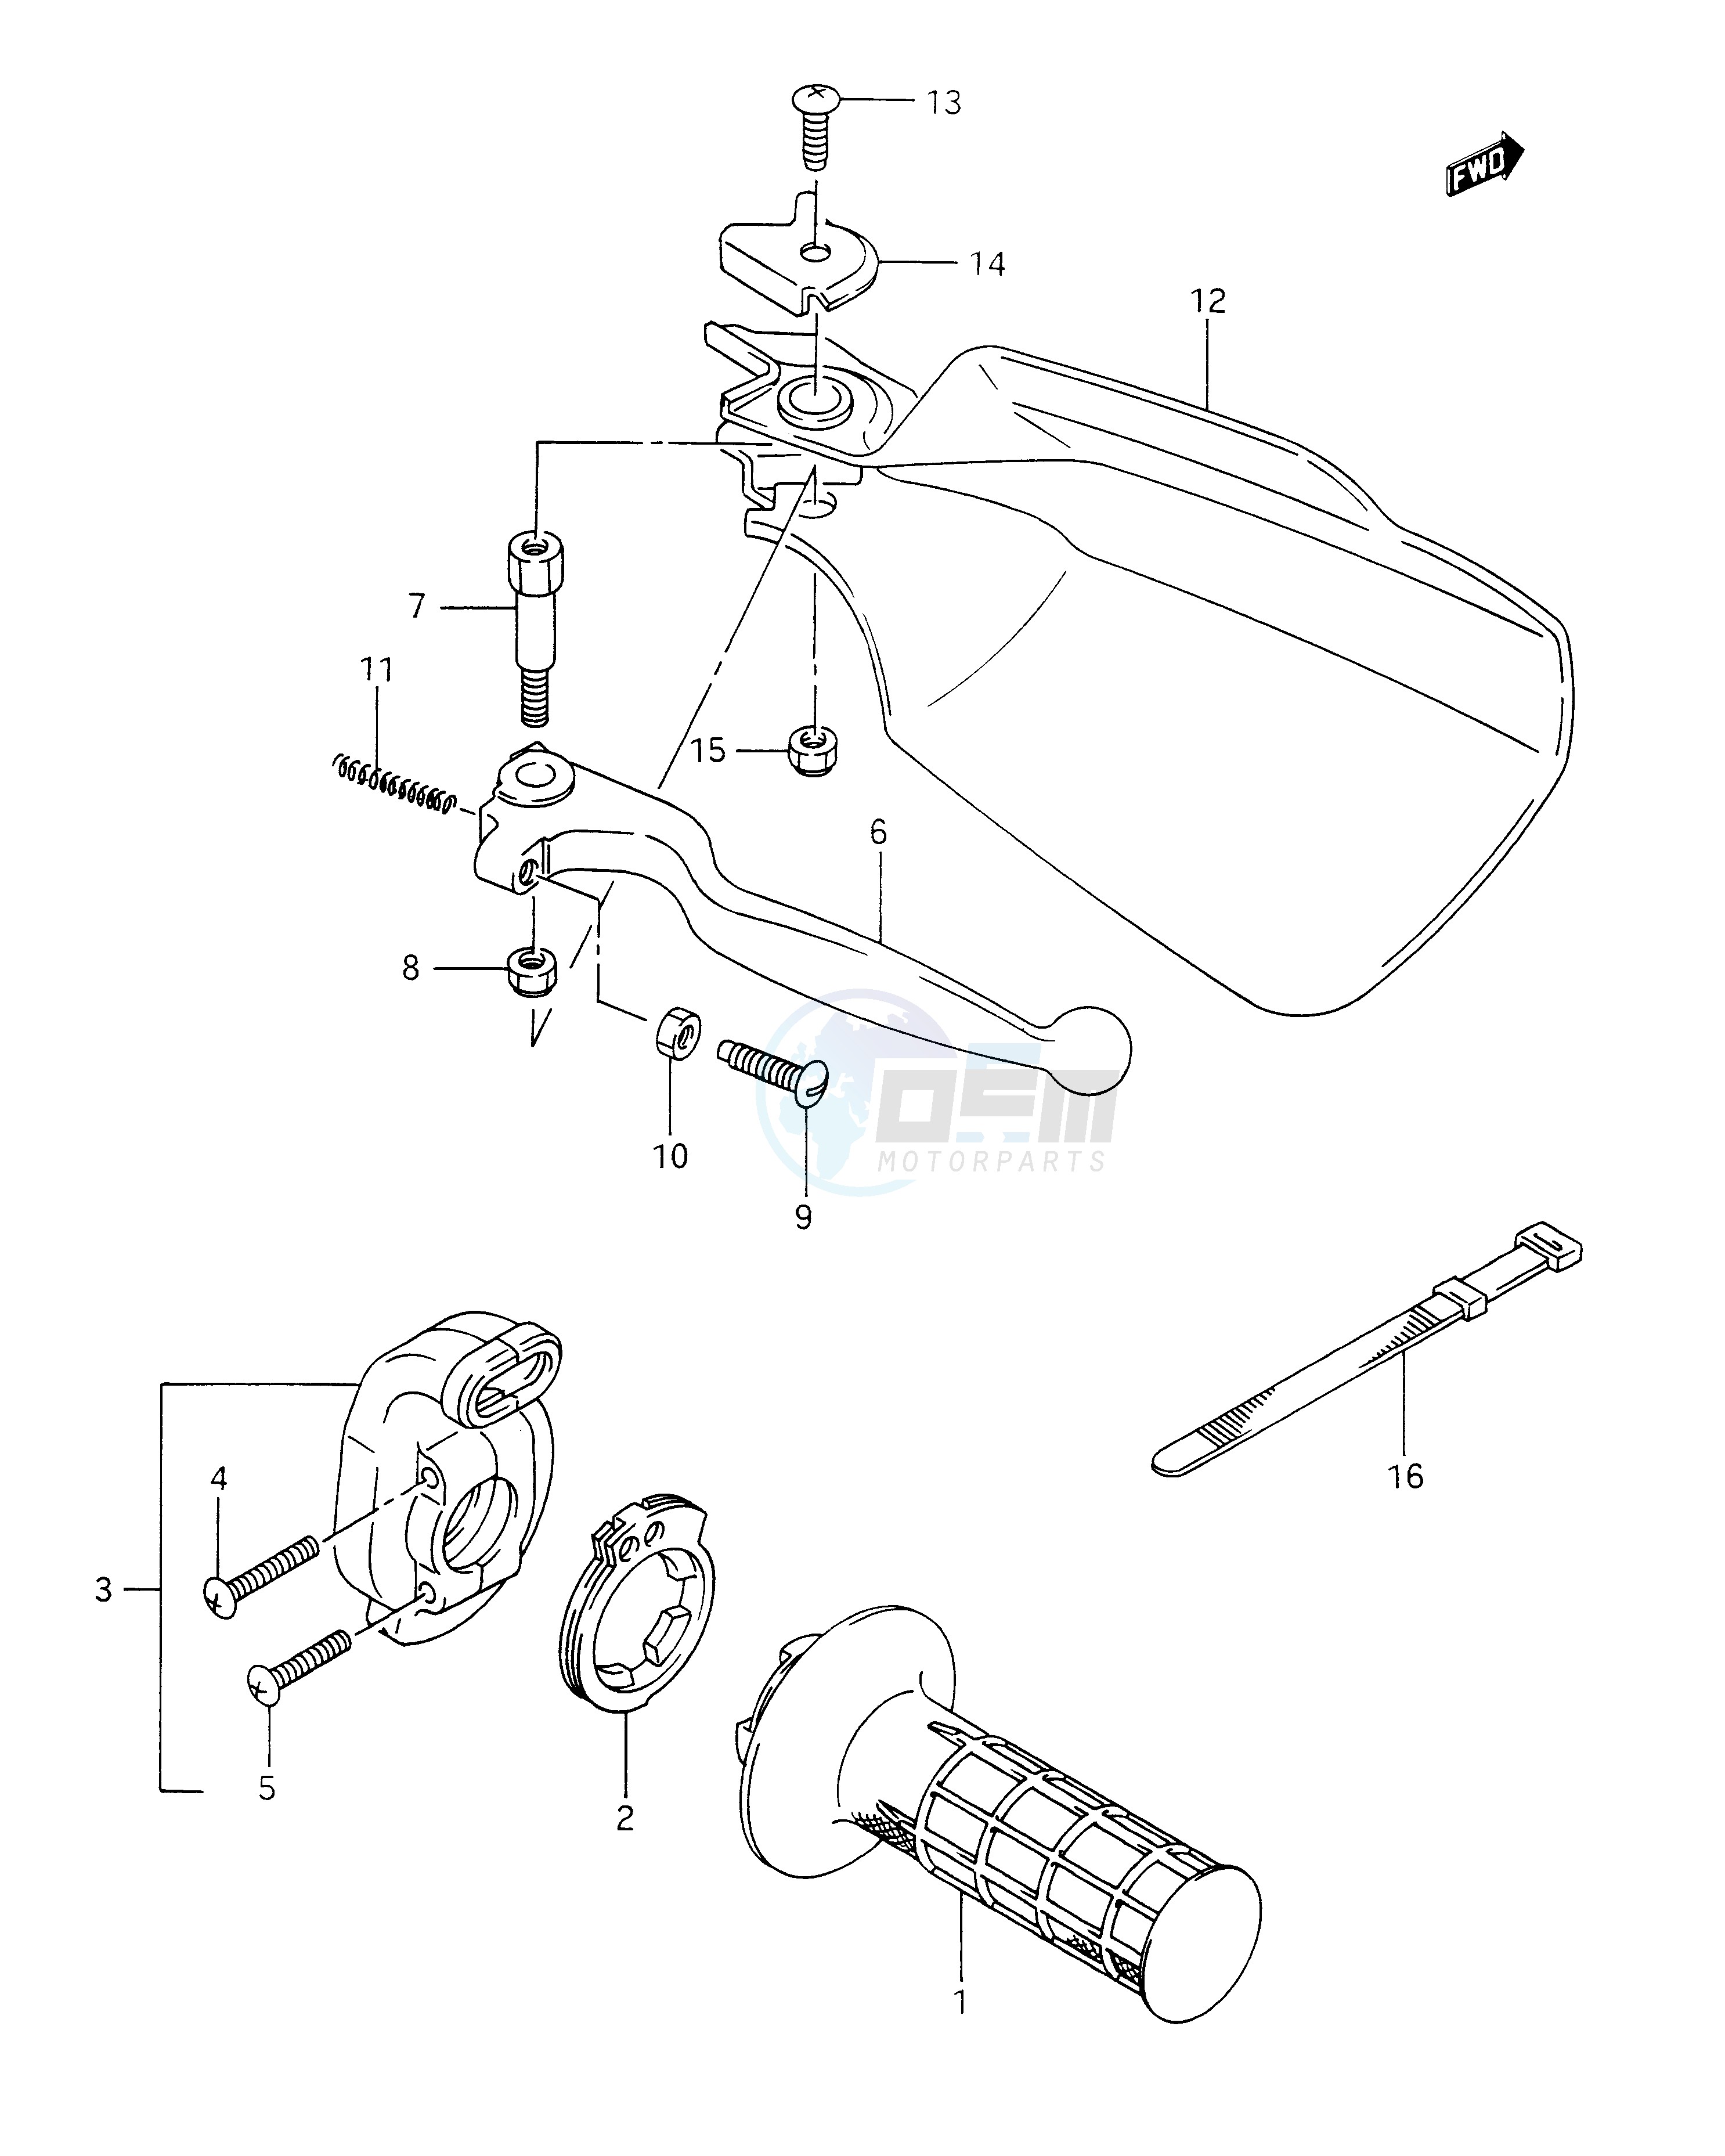 RIGHT KNUCKLE COVER blueprint